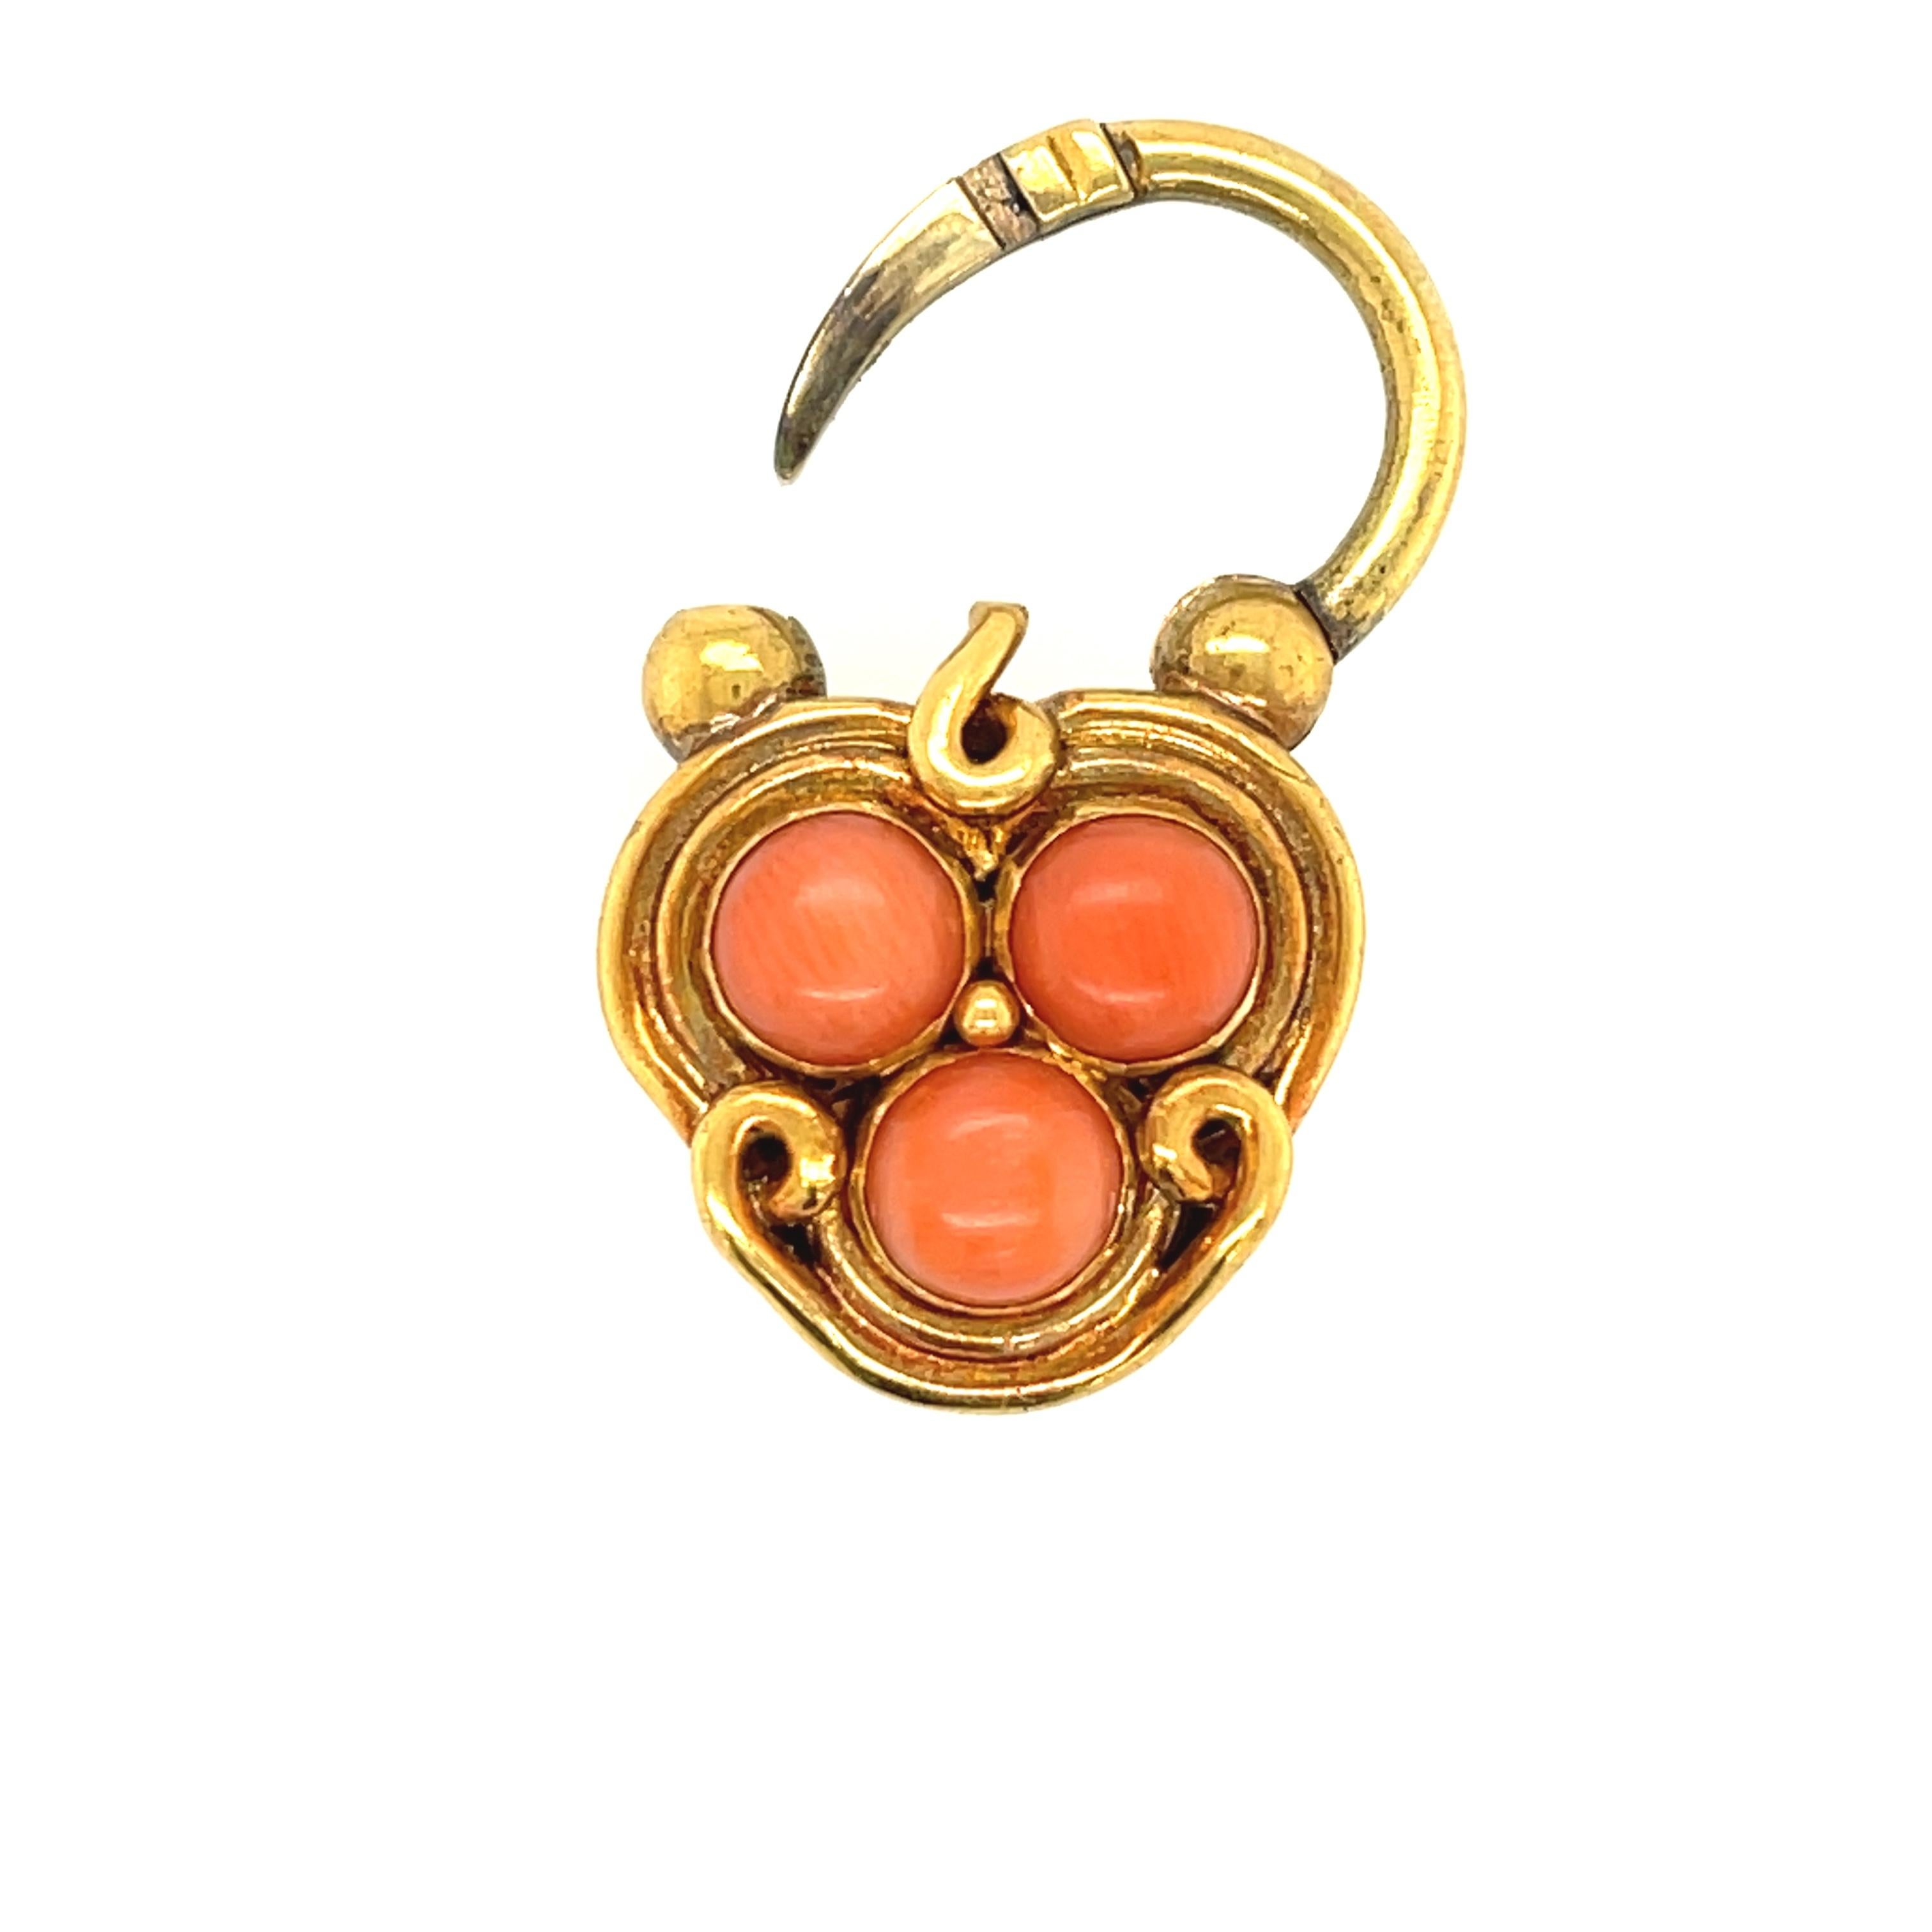 High Victorian Antique Victorian Gold and Coral Link Bracelet with Padlock Clasp